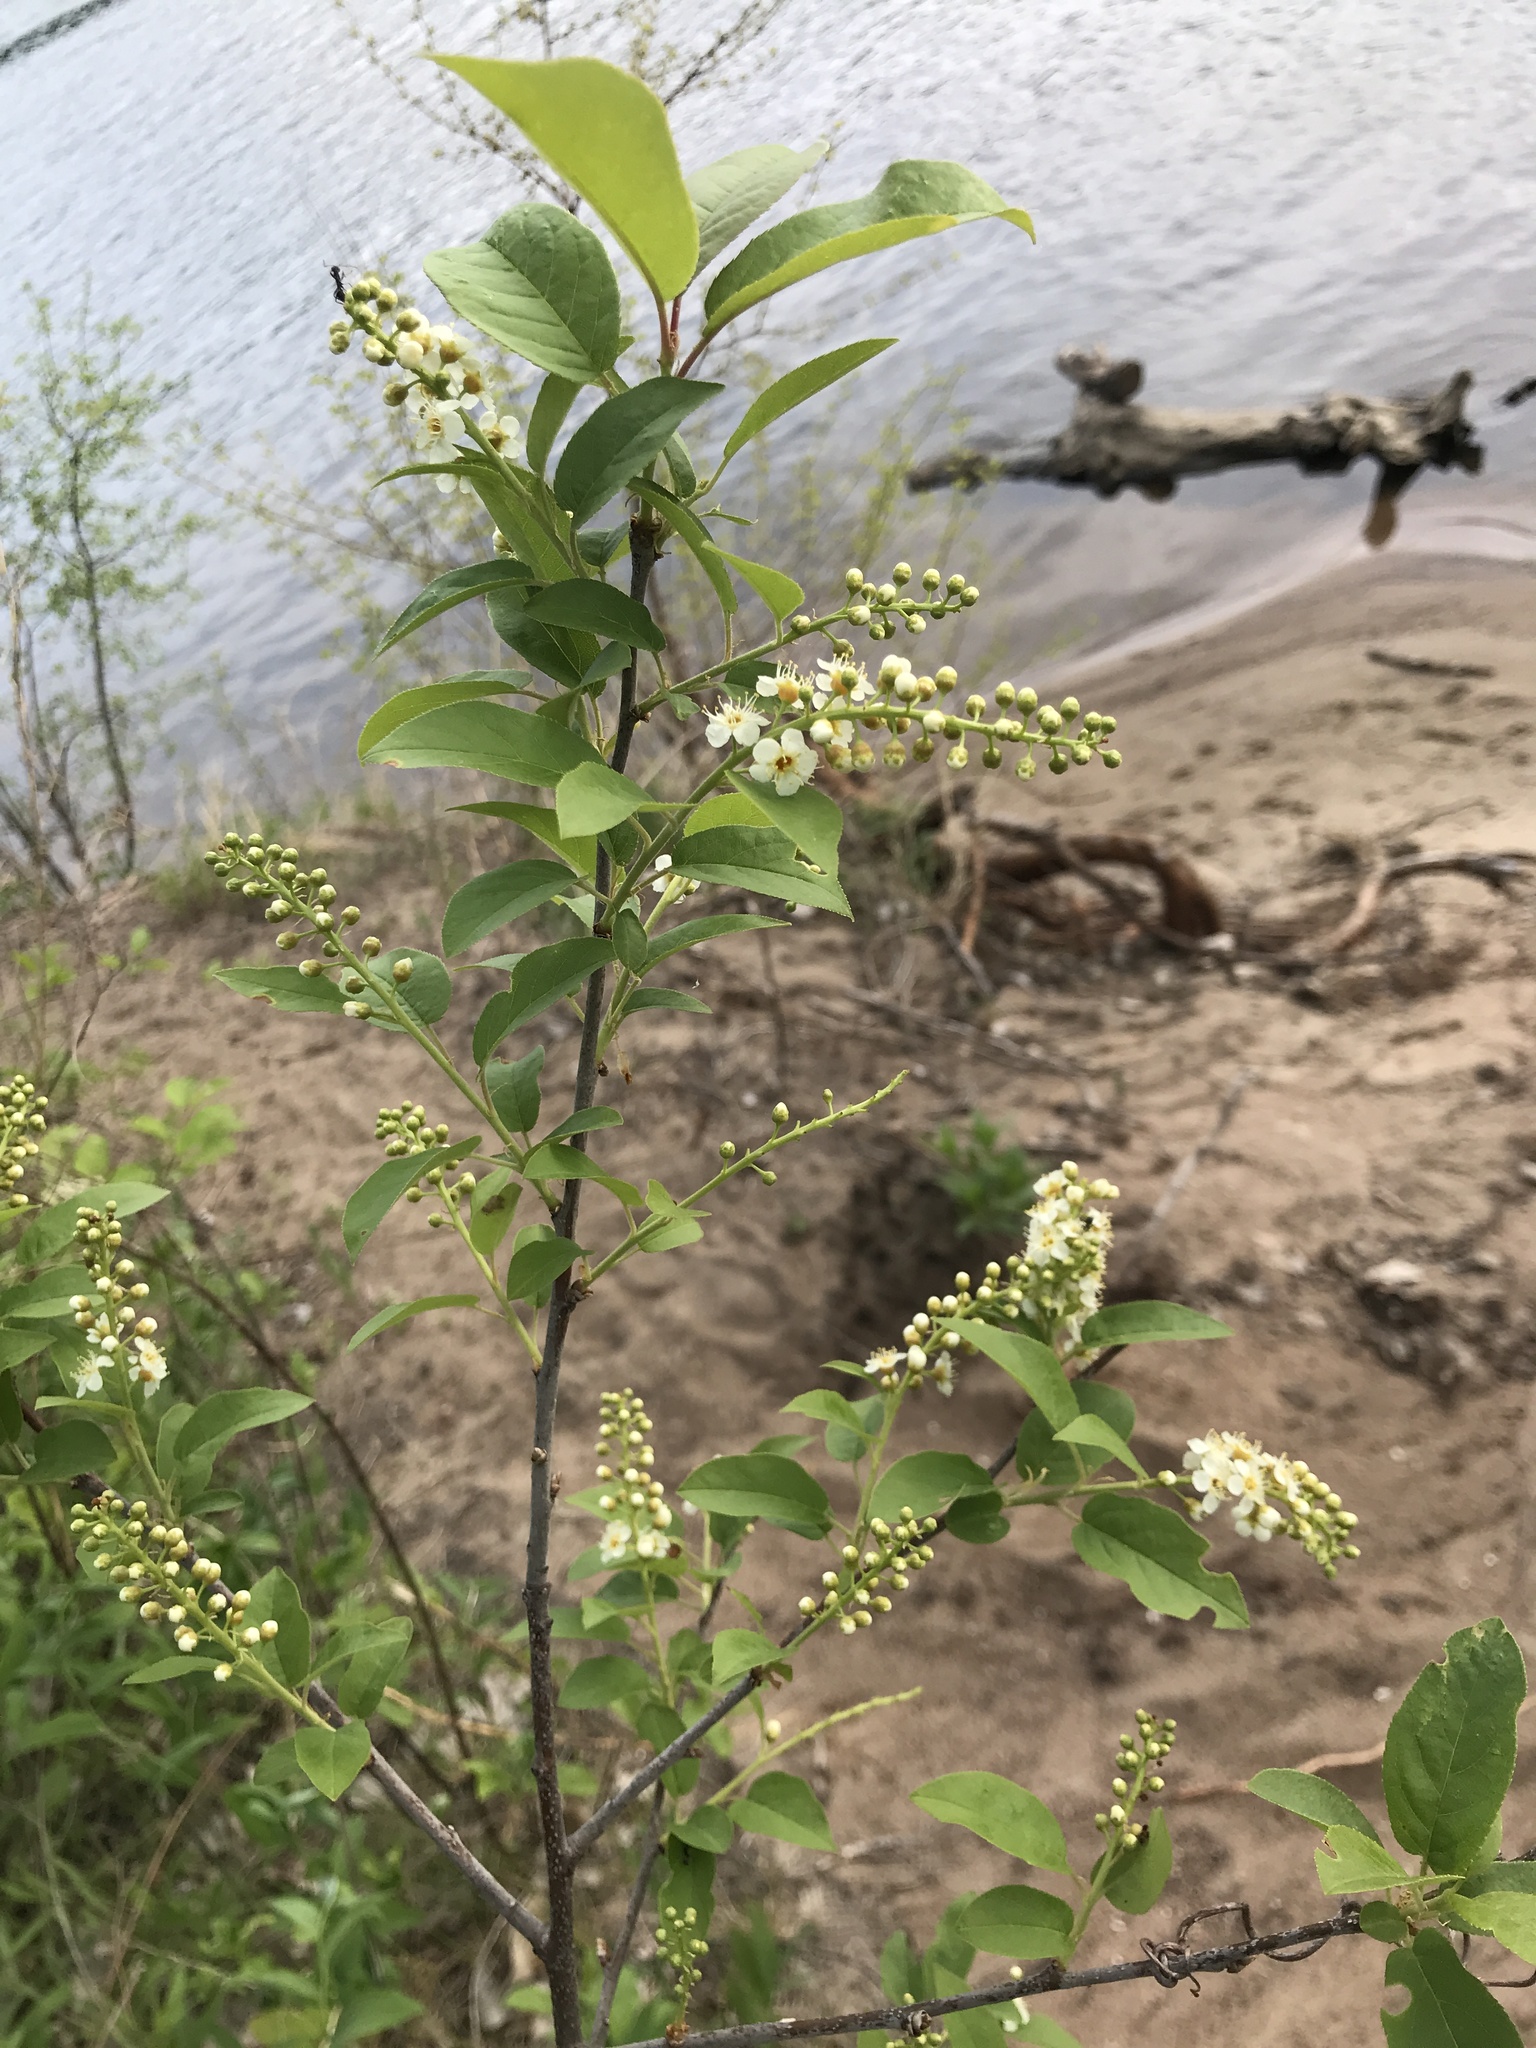 This flowering chokecherry grows near water. The creamy white flowers are about the size of a fingernail and they grow in clusters about the size of a thumb or pinky finger.